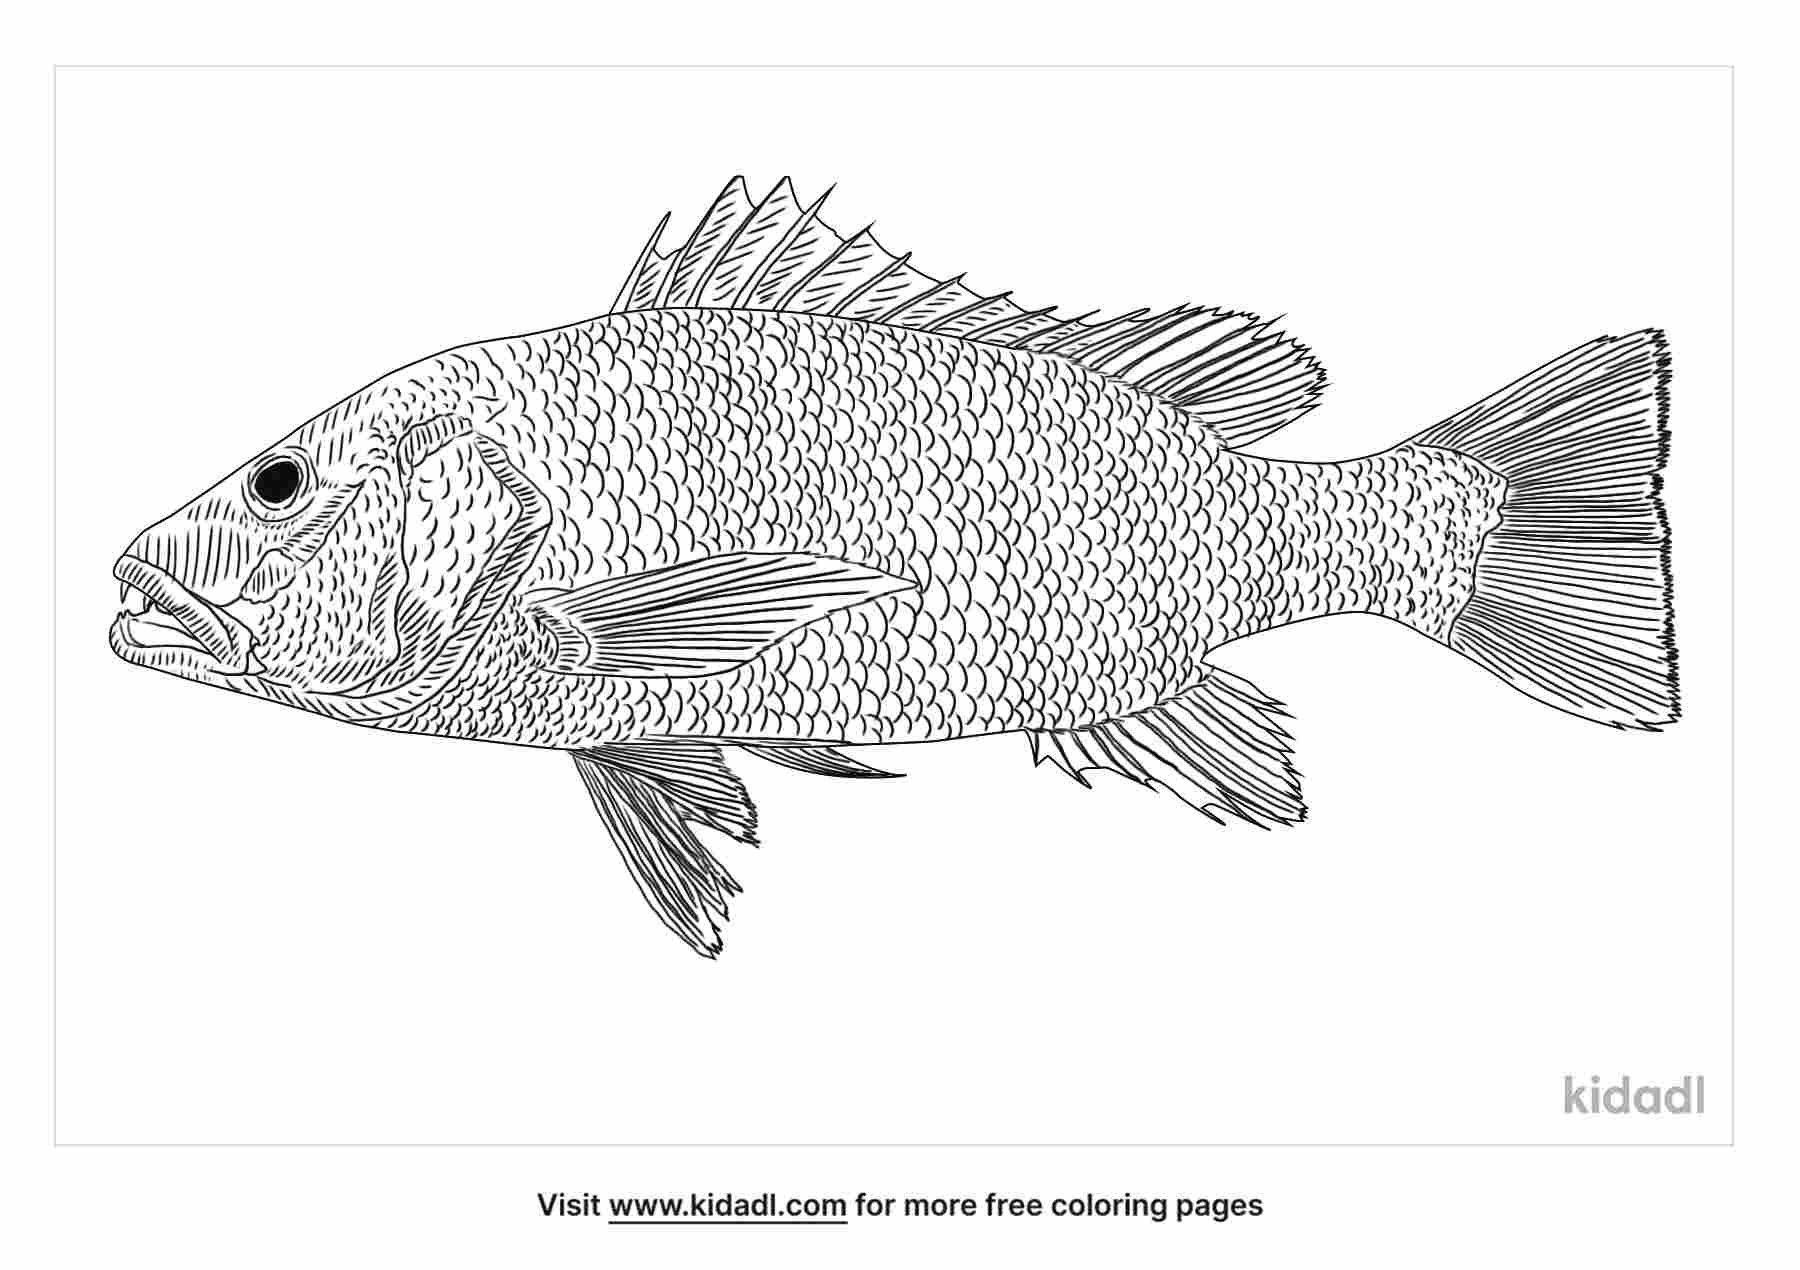 Fun Mangrove Red Snapper coloring page for kids.